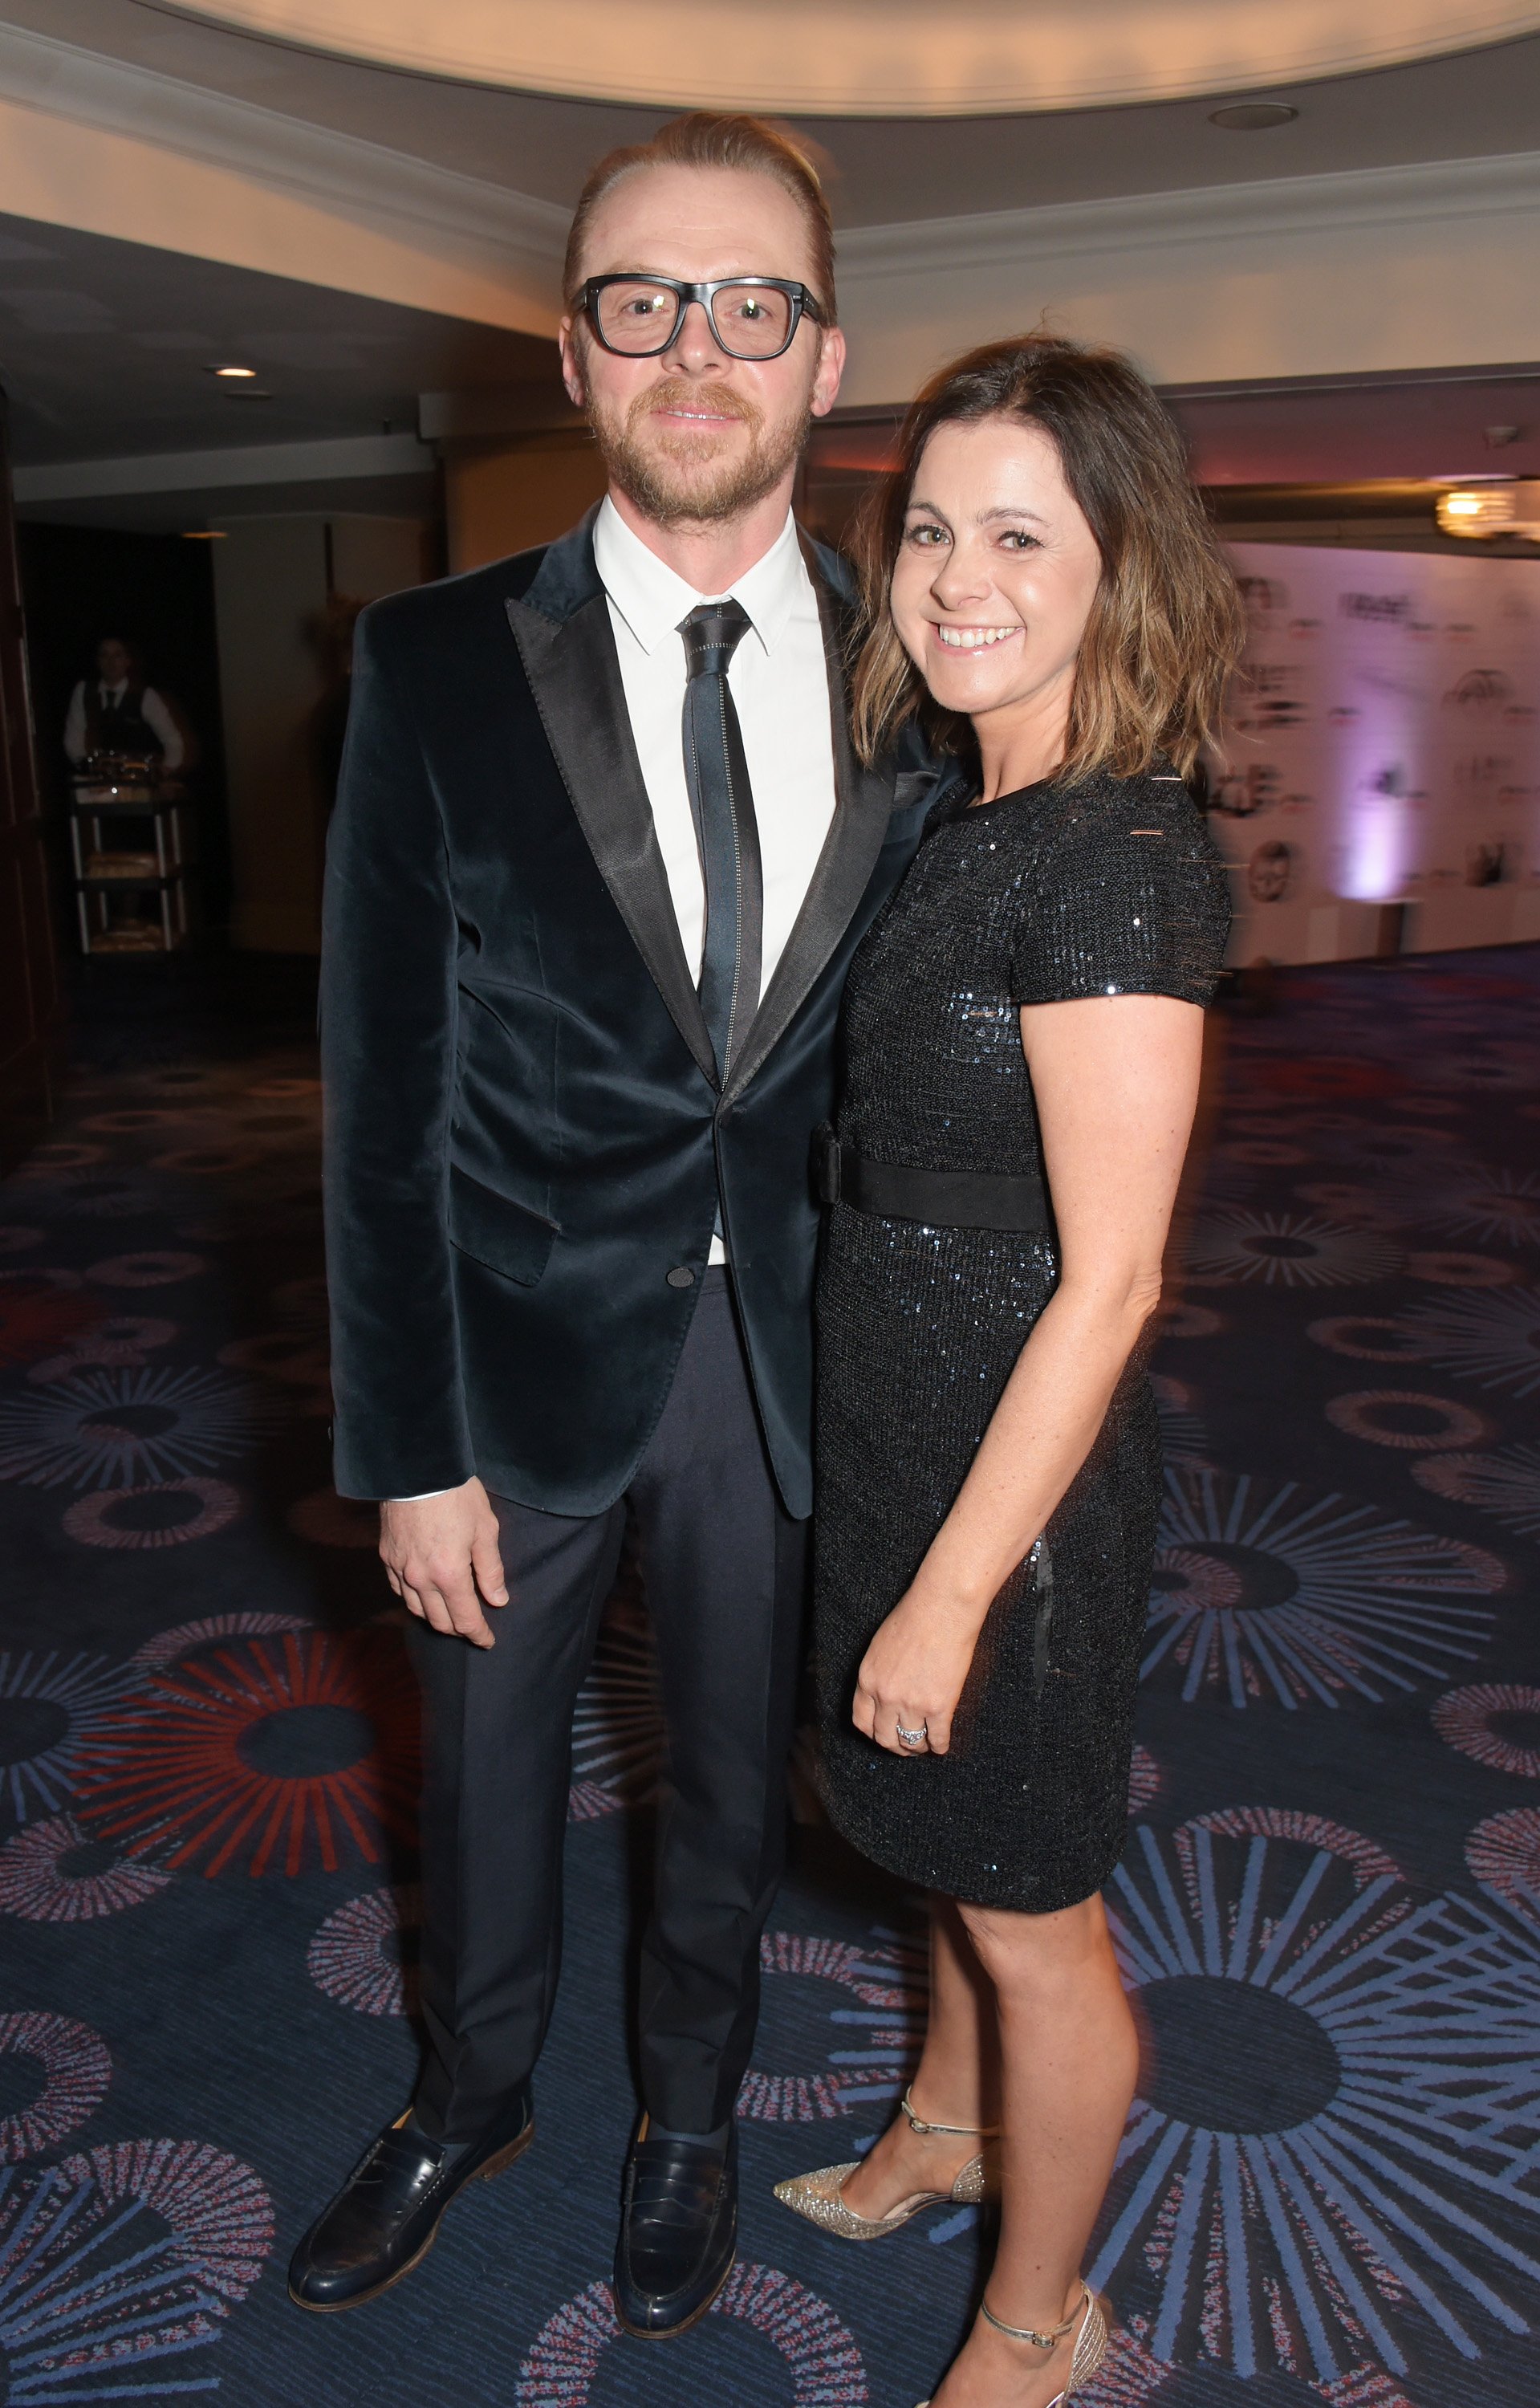 Simon Pegg and Maureen Pegg during the Jameson Empire Awards 2015 at Grosvenor House on March 29, 2015, in London, England. | Source:Getty Images